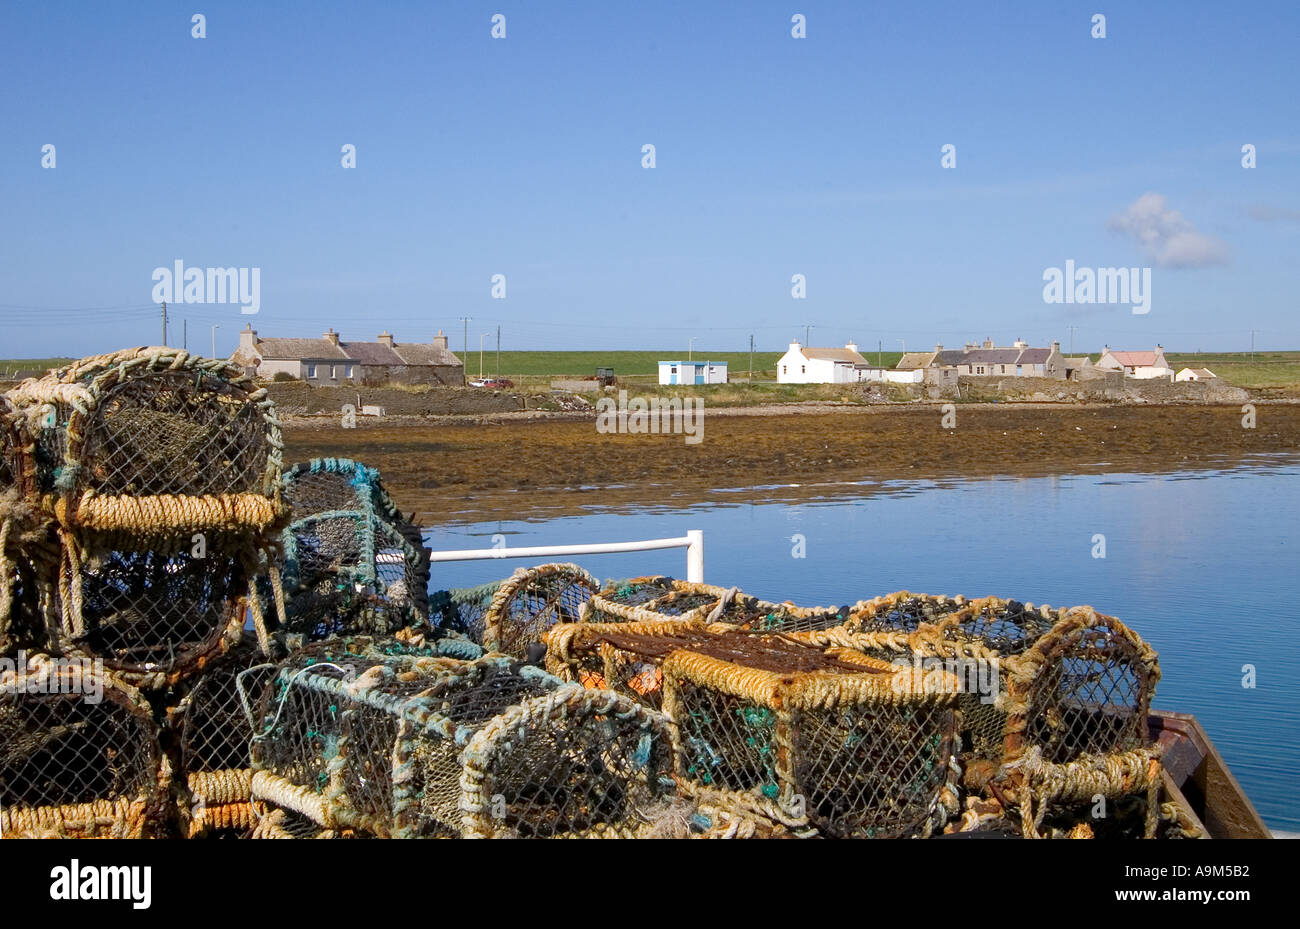 dh Kettletoft SANDAY ORKNEY Crab Lobster creels harbour and village houses Stock Photo